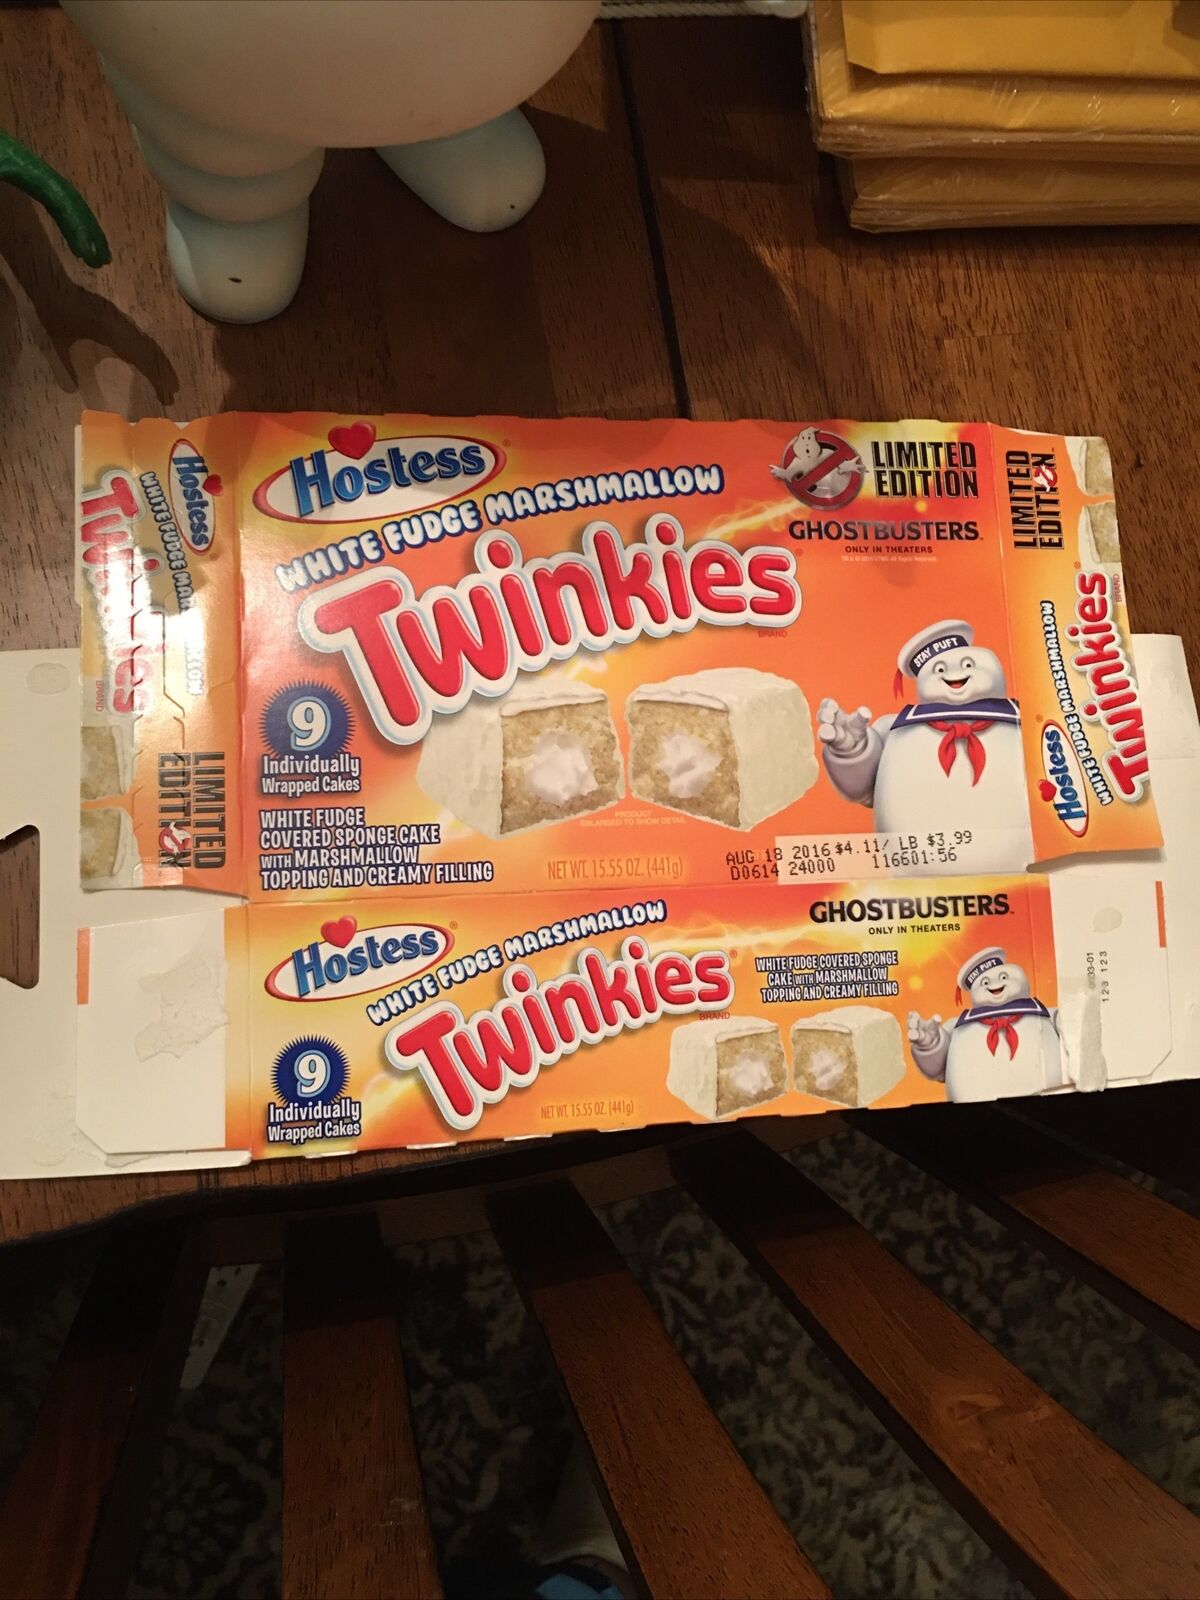 2016 Hostess TWINKIES Ghostbusters Limited Edition White Fudge Marshmallow Box